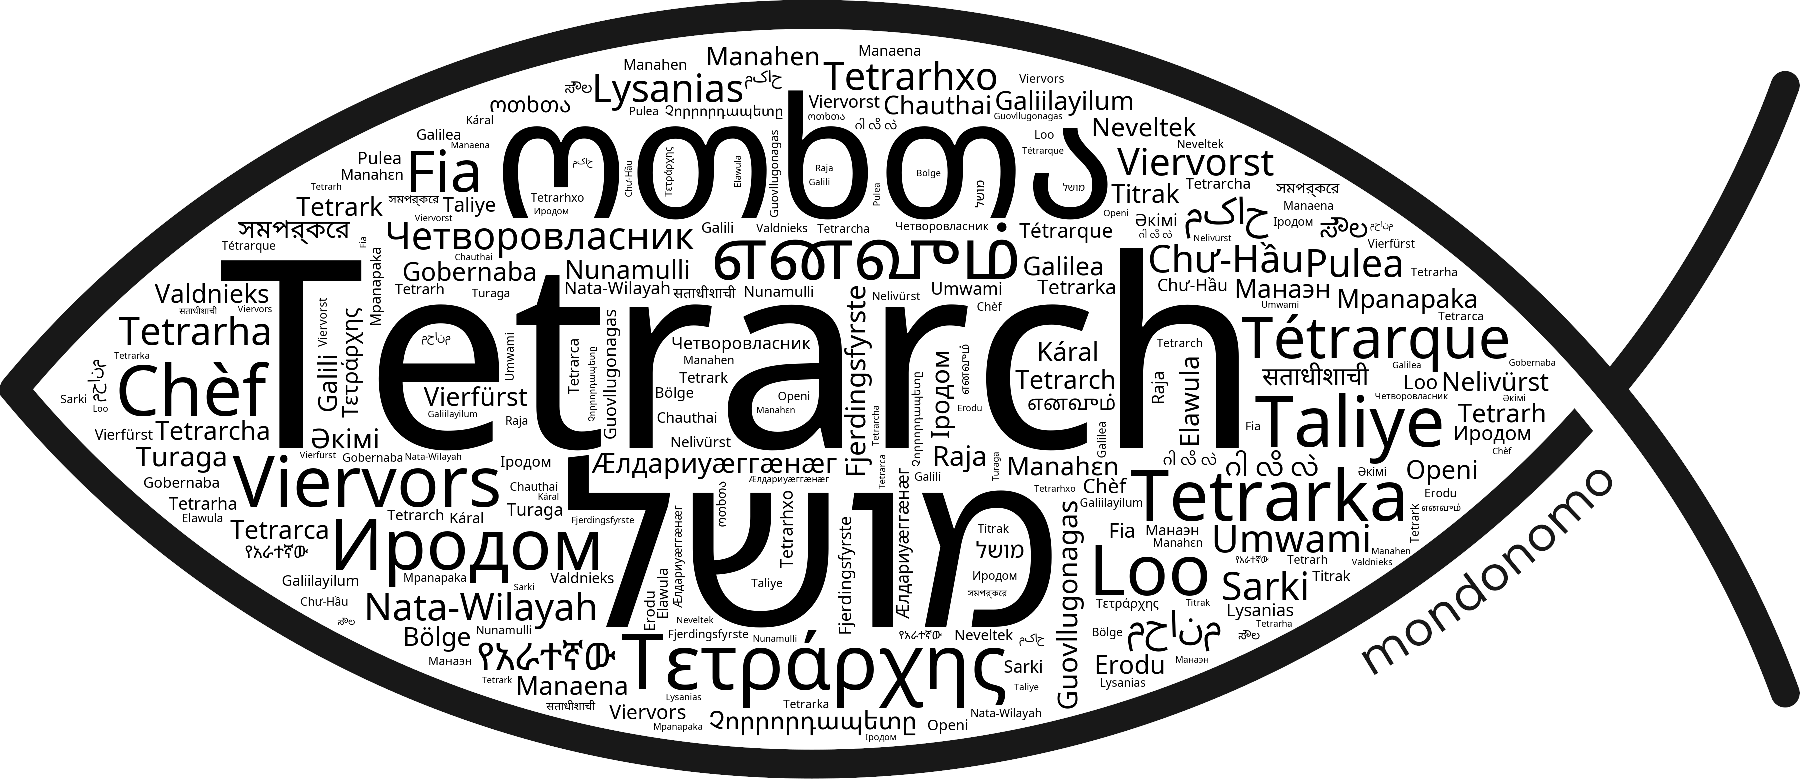 Name Tetrarch in the world's Bibles